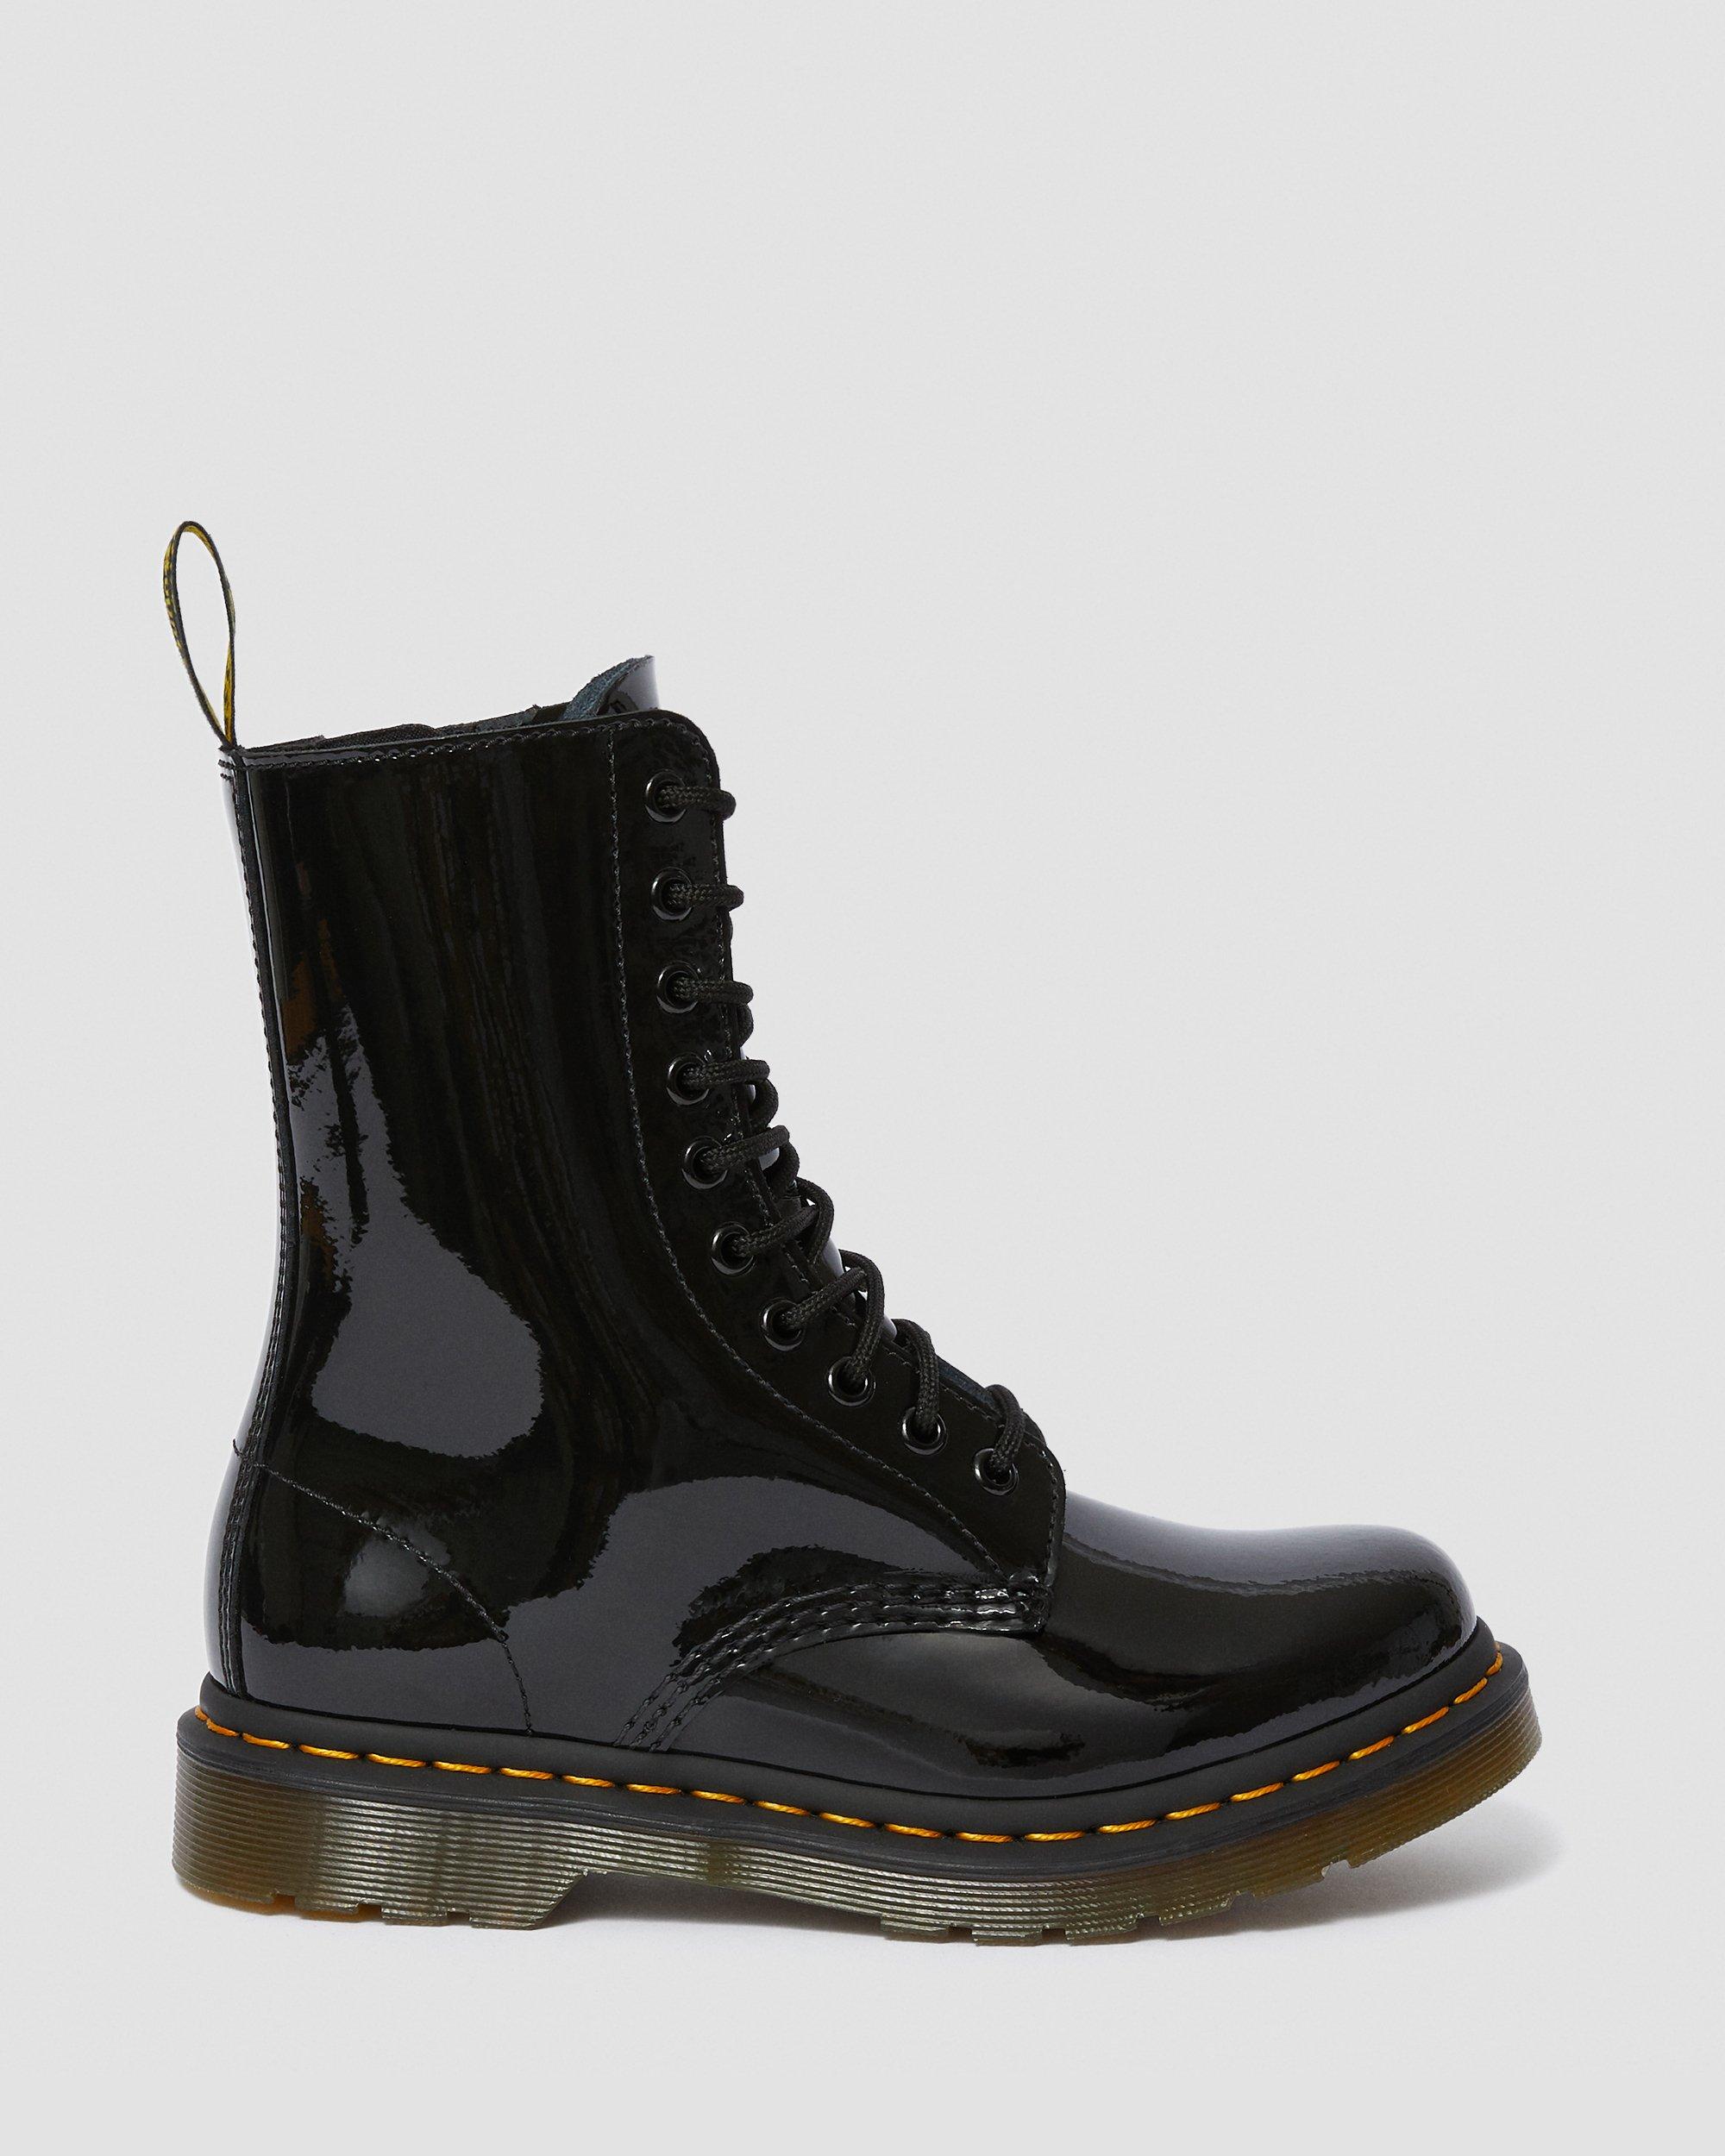 1490 WOMEN'S PATENT LEATHER MID CALF BOOTS | Dr. Martens